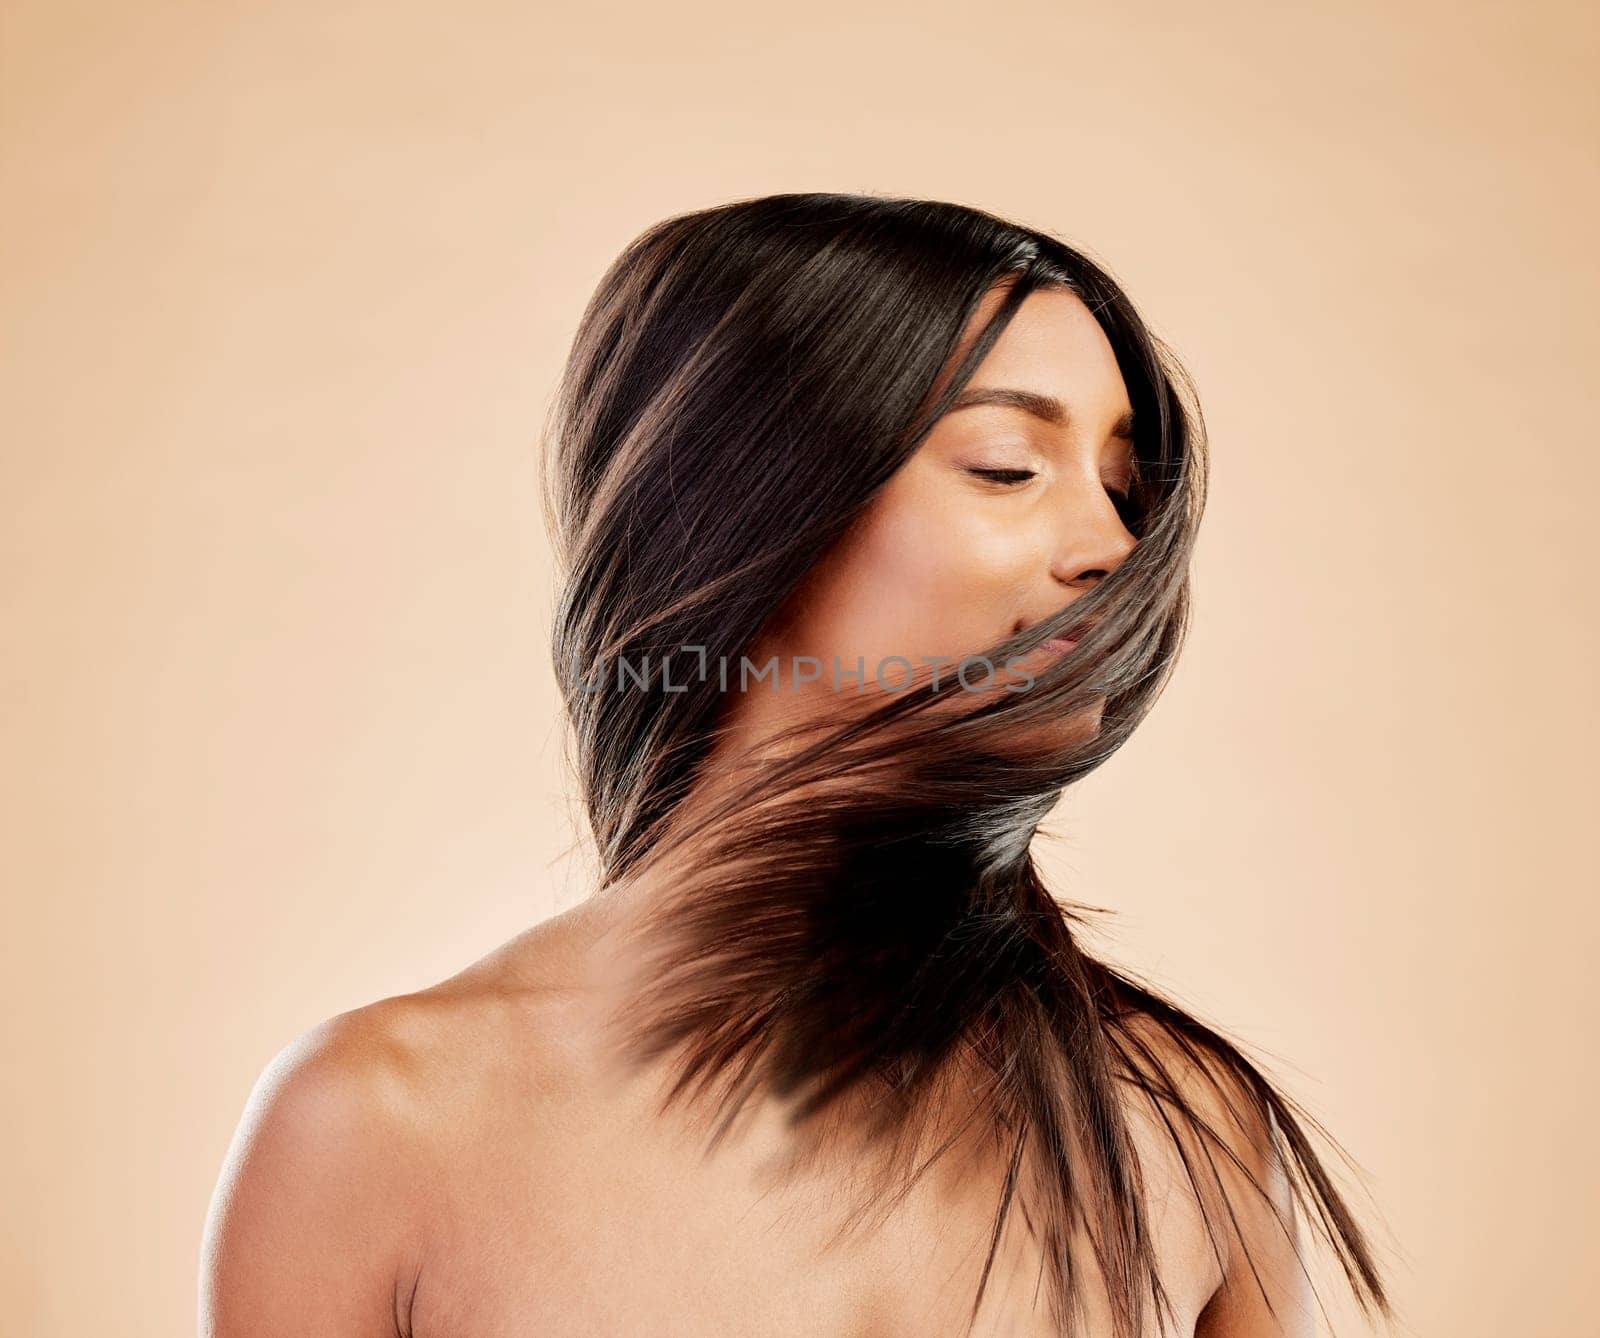 Woman, shake hair and beauty with growth, texture and shine with natural cosmetics on studio background. Indian female model, satisfied with salon treatment and Brazilian, hairstyle and haircare.